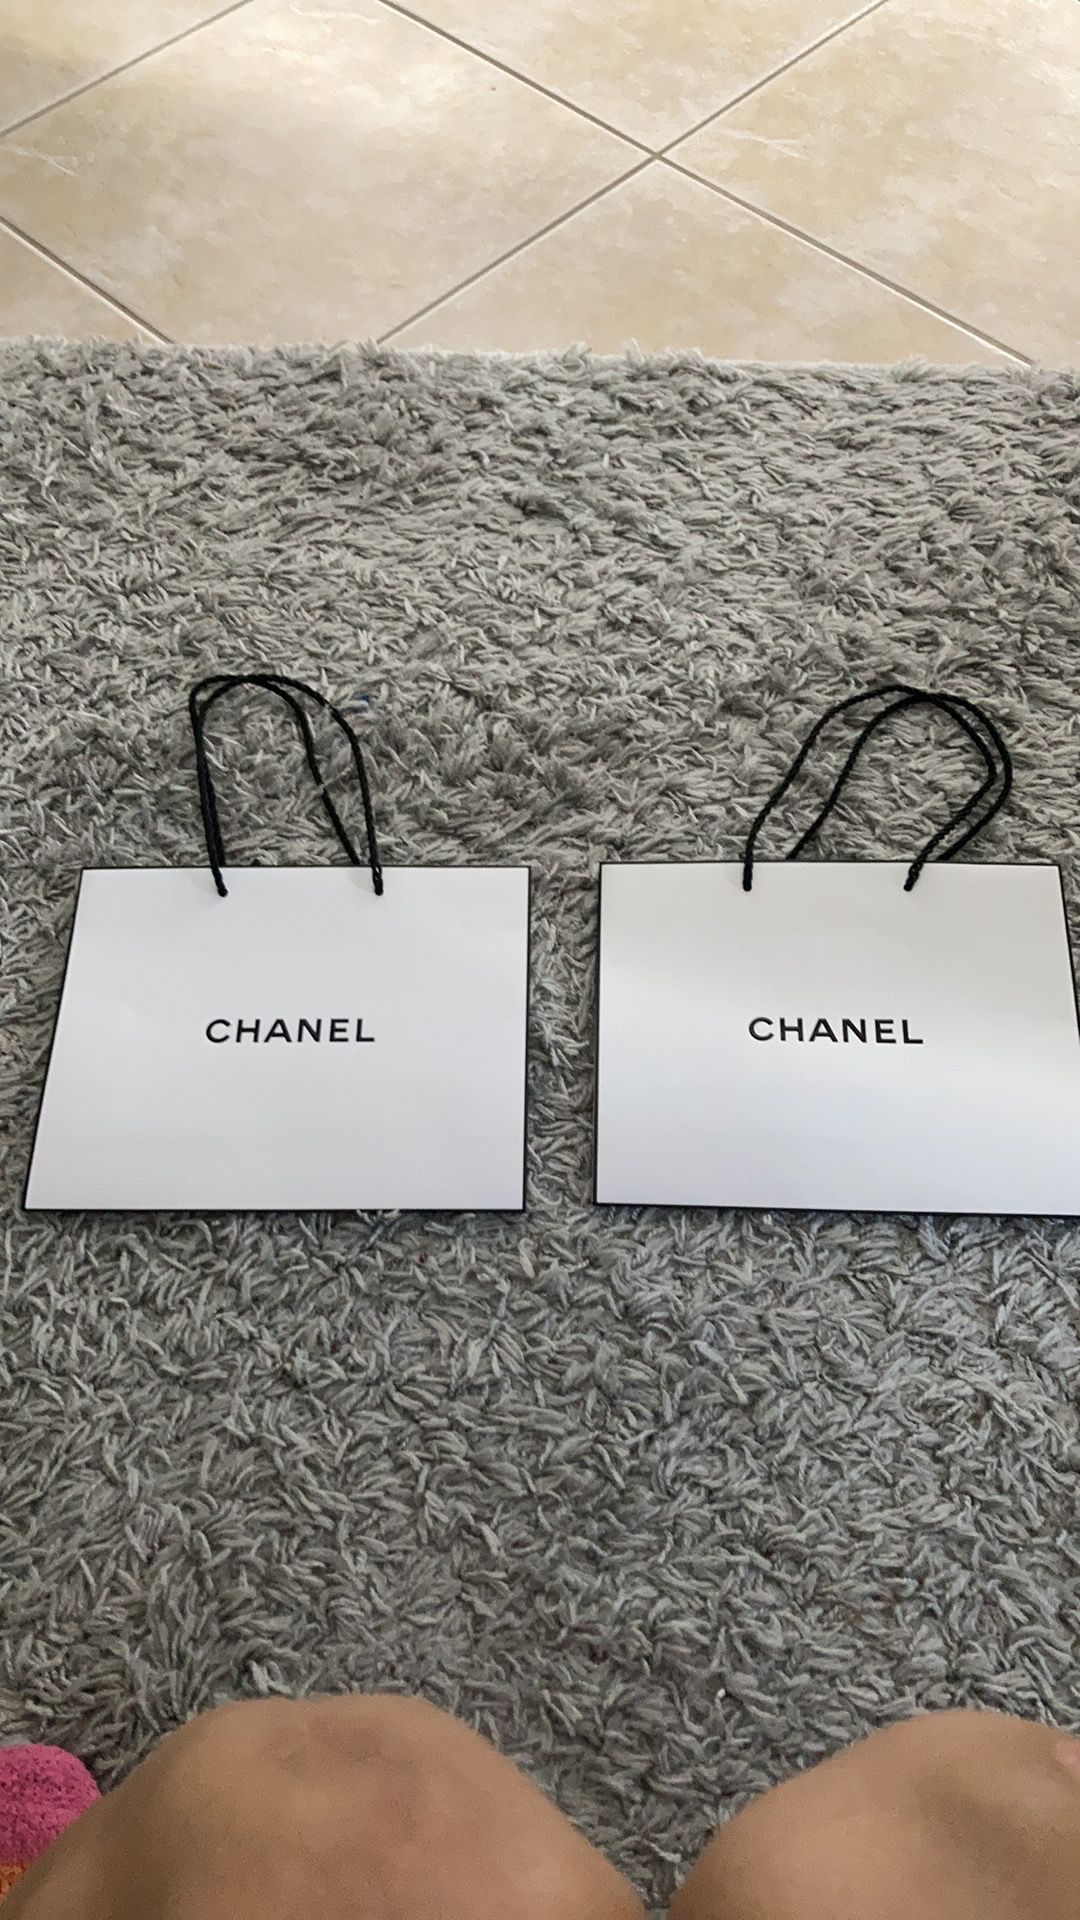 Chanel brand new shopping bags ( set of 2)